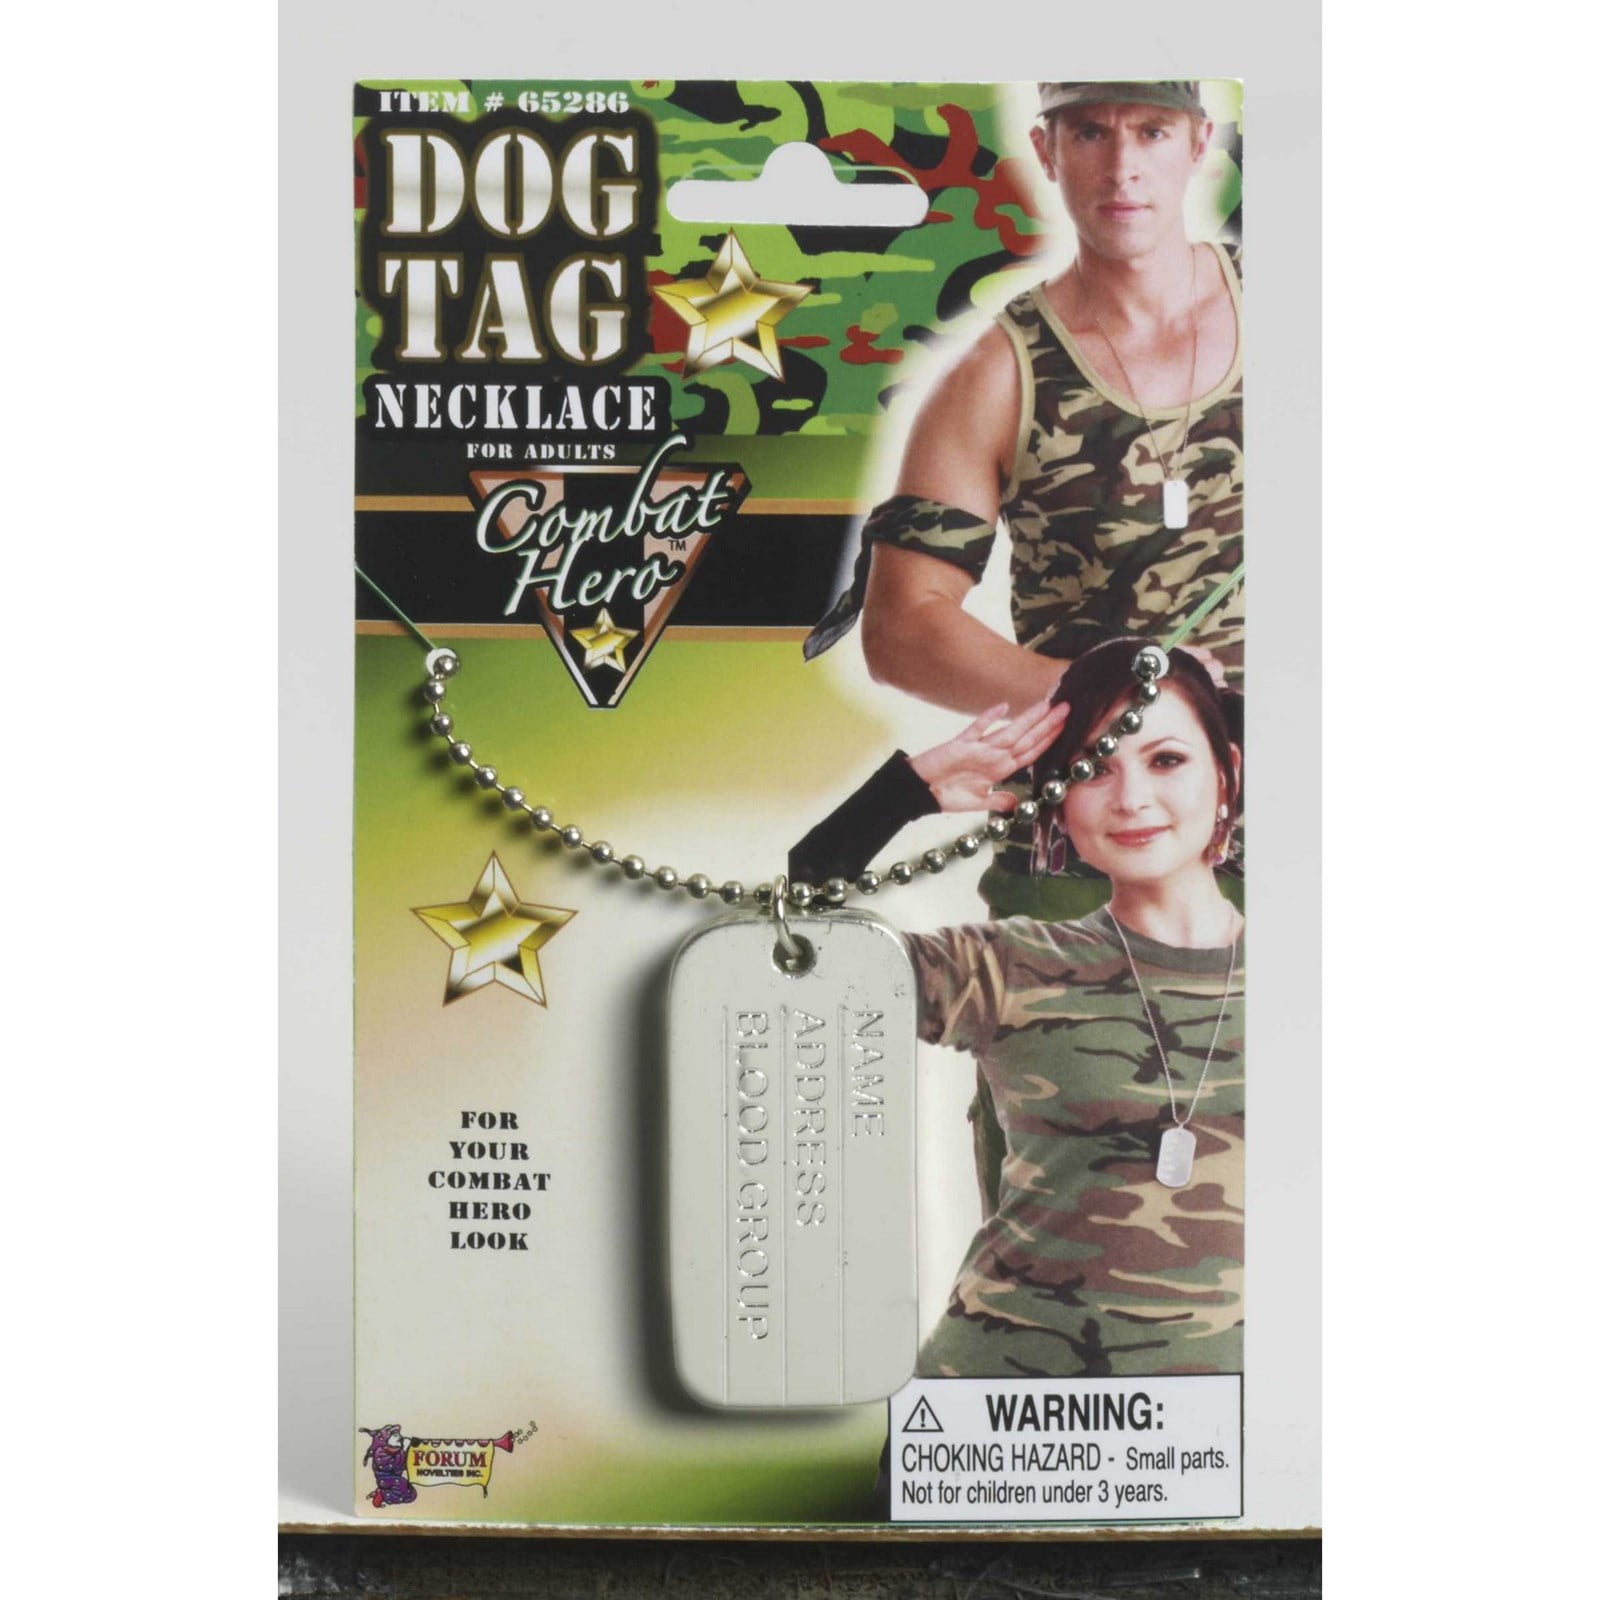 Dog Tag Necklace Army Fancy Dress Mens Military Uniform Costume Outfit Accessory 